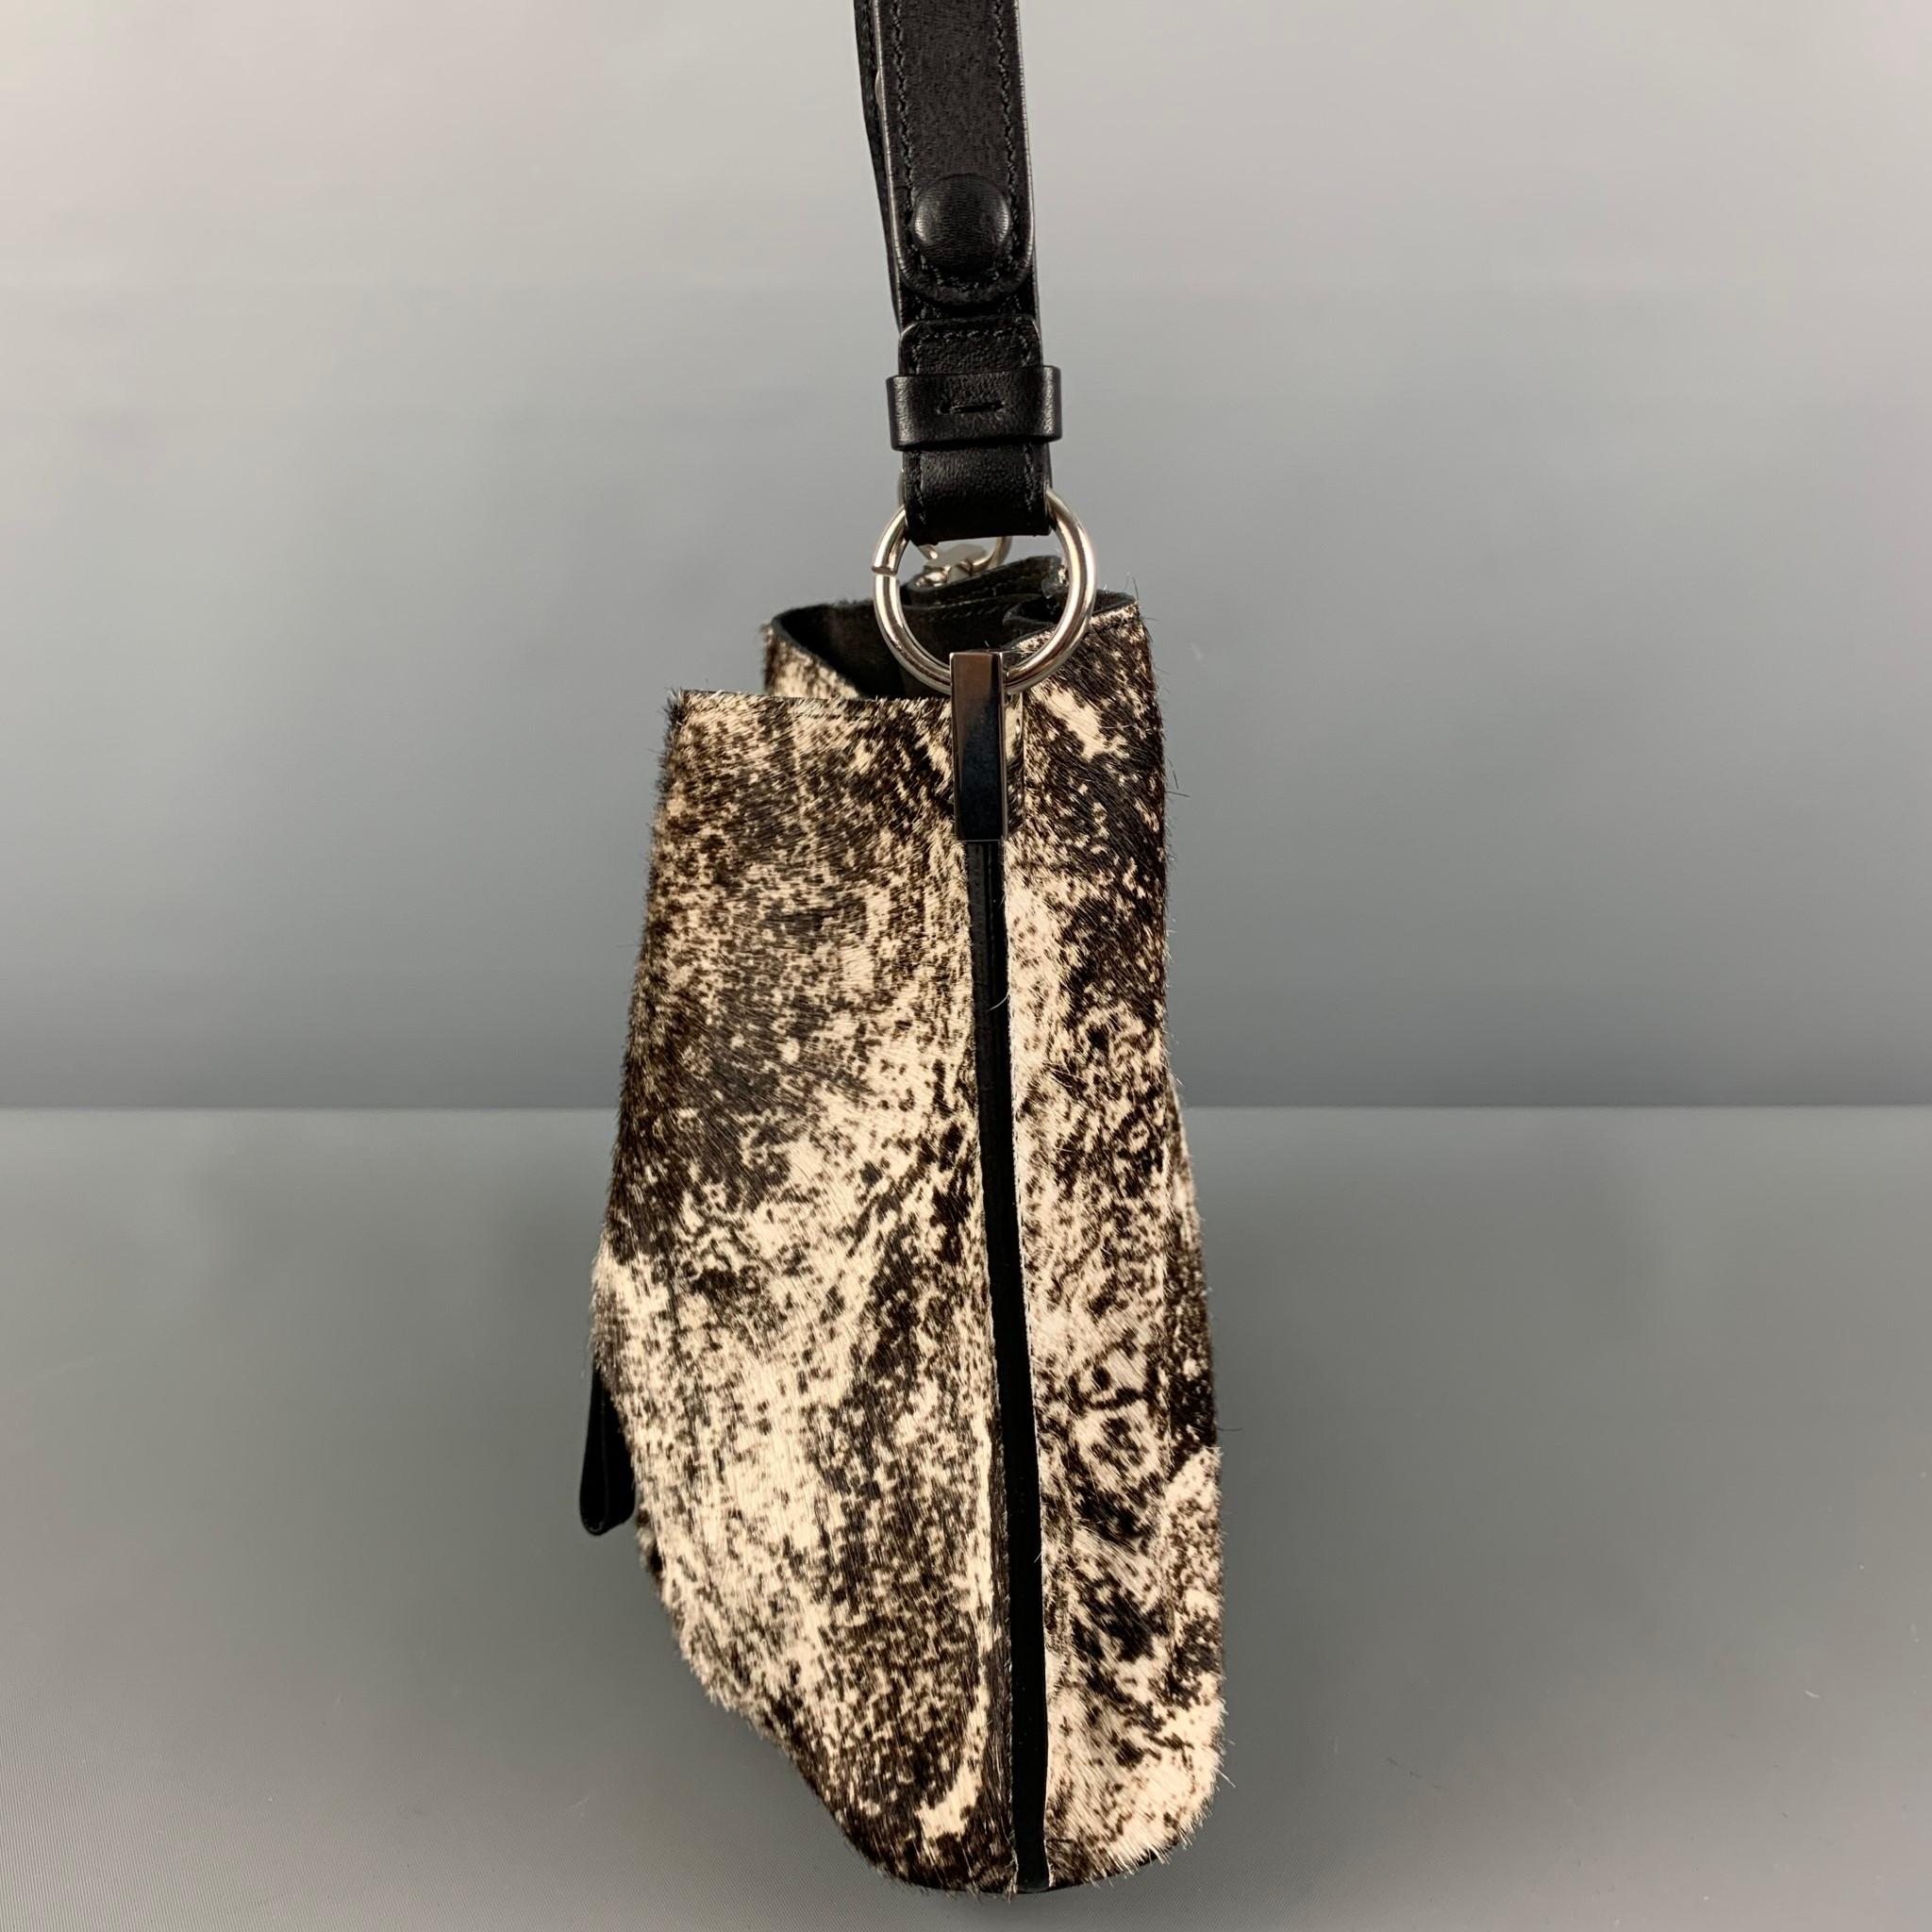 MAISON MARGIELA handbag comes in a brown & cream marbled calfskin featuring a leather top handle strap, dual compartments. Made in Italy.

Excellent Pre-Owned Condition.

Measurements:

Length: 9.25 in.
Width: 4.7 in.
Height: 8 in.
Drop: 12 in.